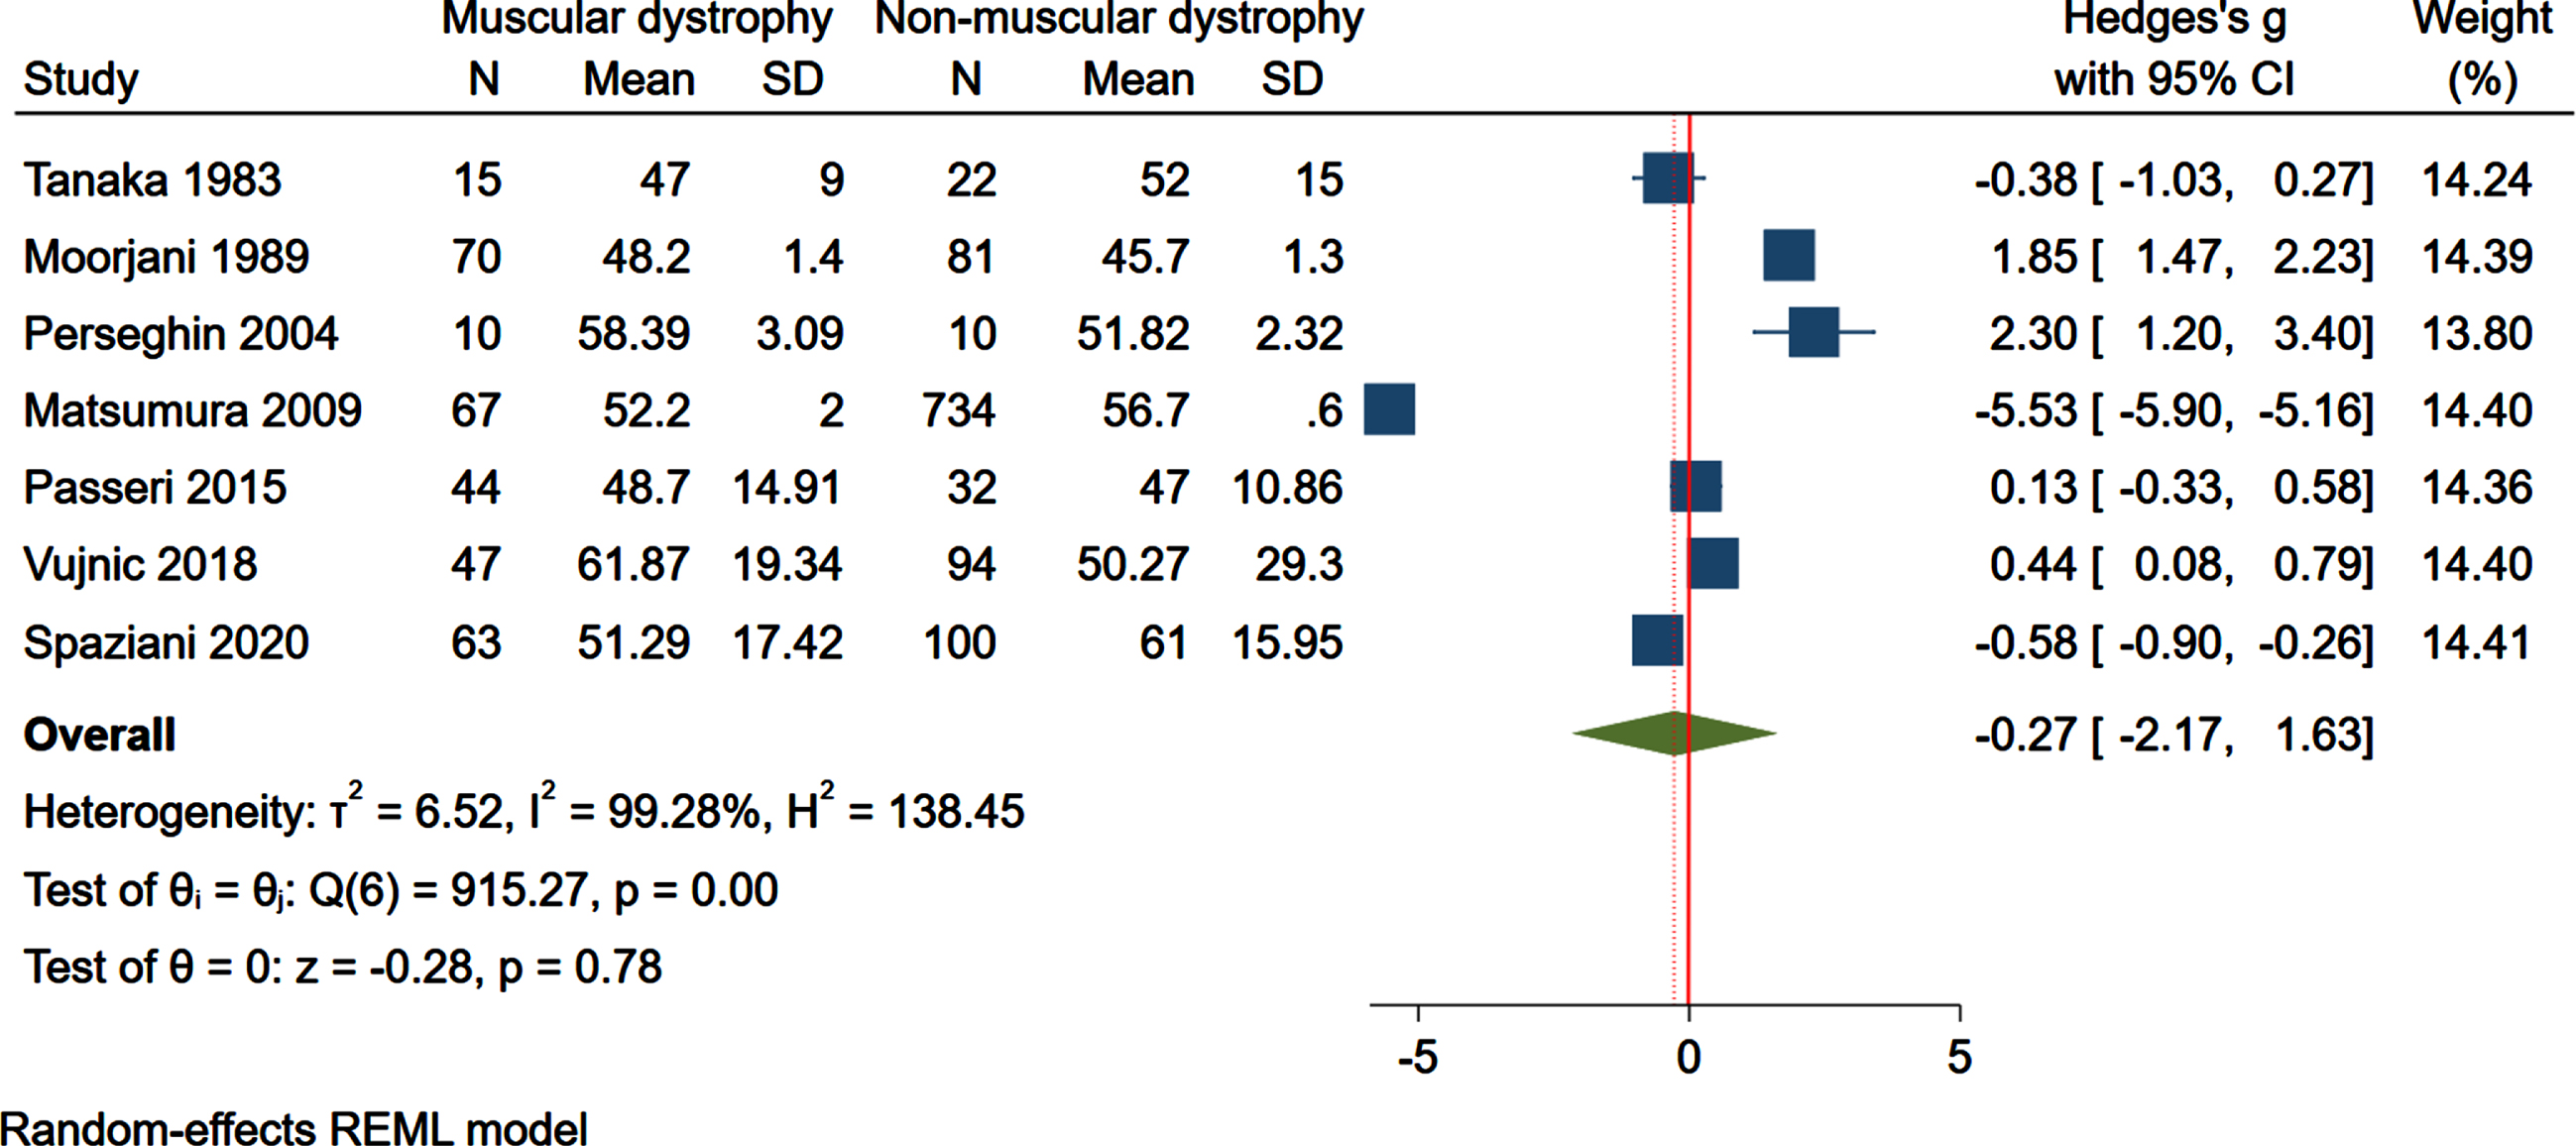 Forest plot of plasma/serum high-density lipoprotein (HDL) cholesterol levels and summary measure (dotted line) favoring lower HDL cholesterol in muscular dystrophic patients vs. non-muscular dystrophic control subjects. SD, standard deviation; CI, confidence interval.